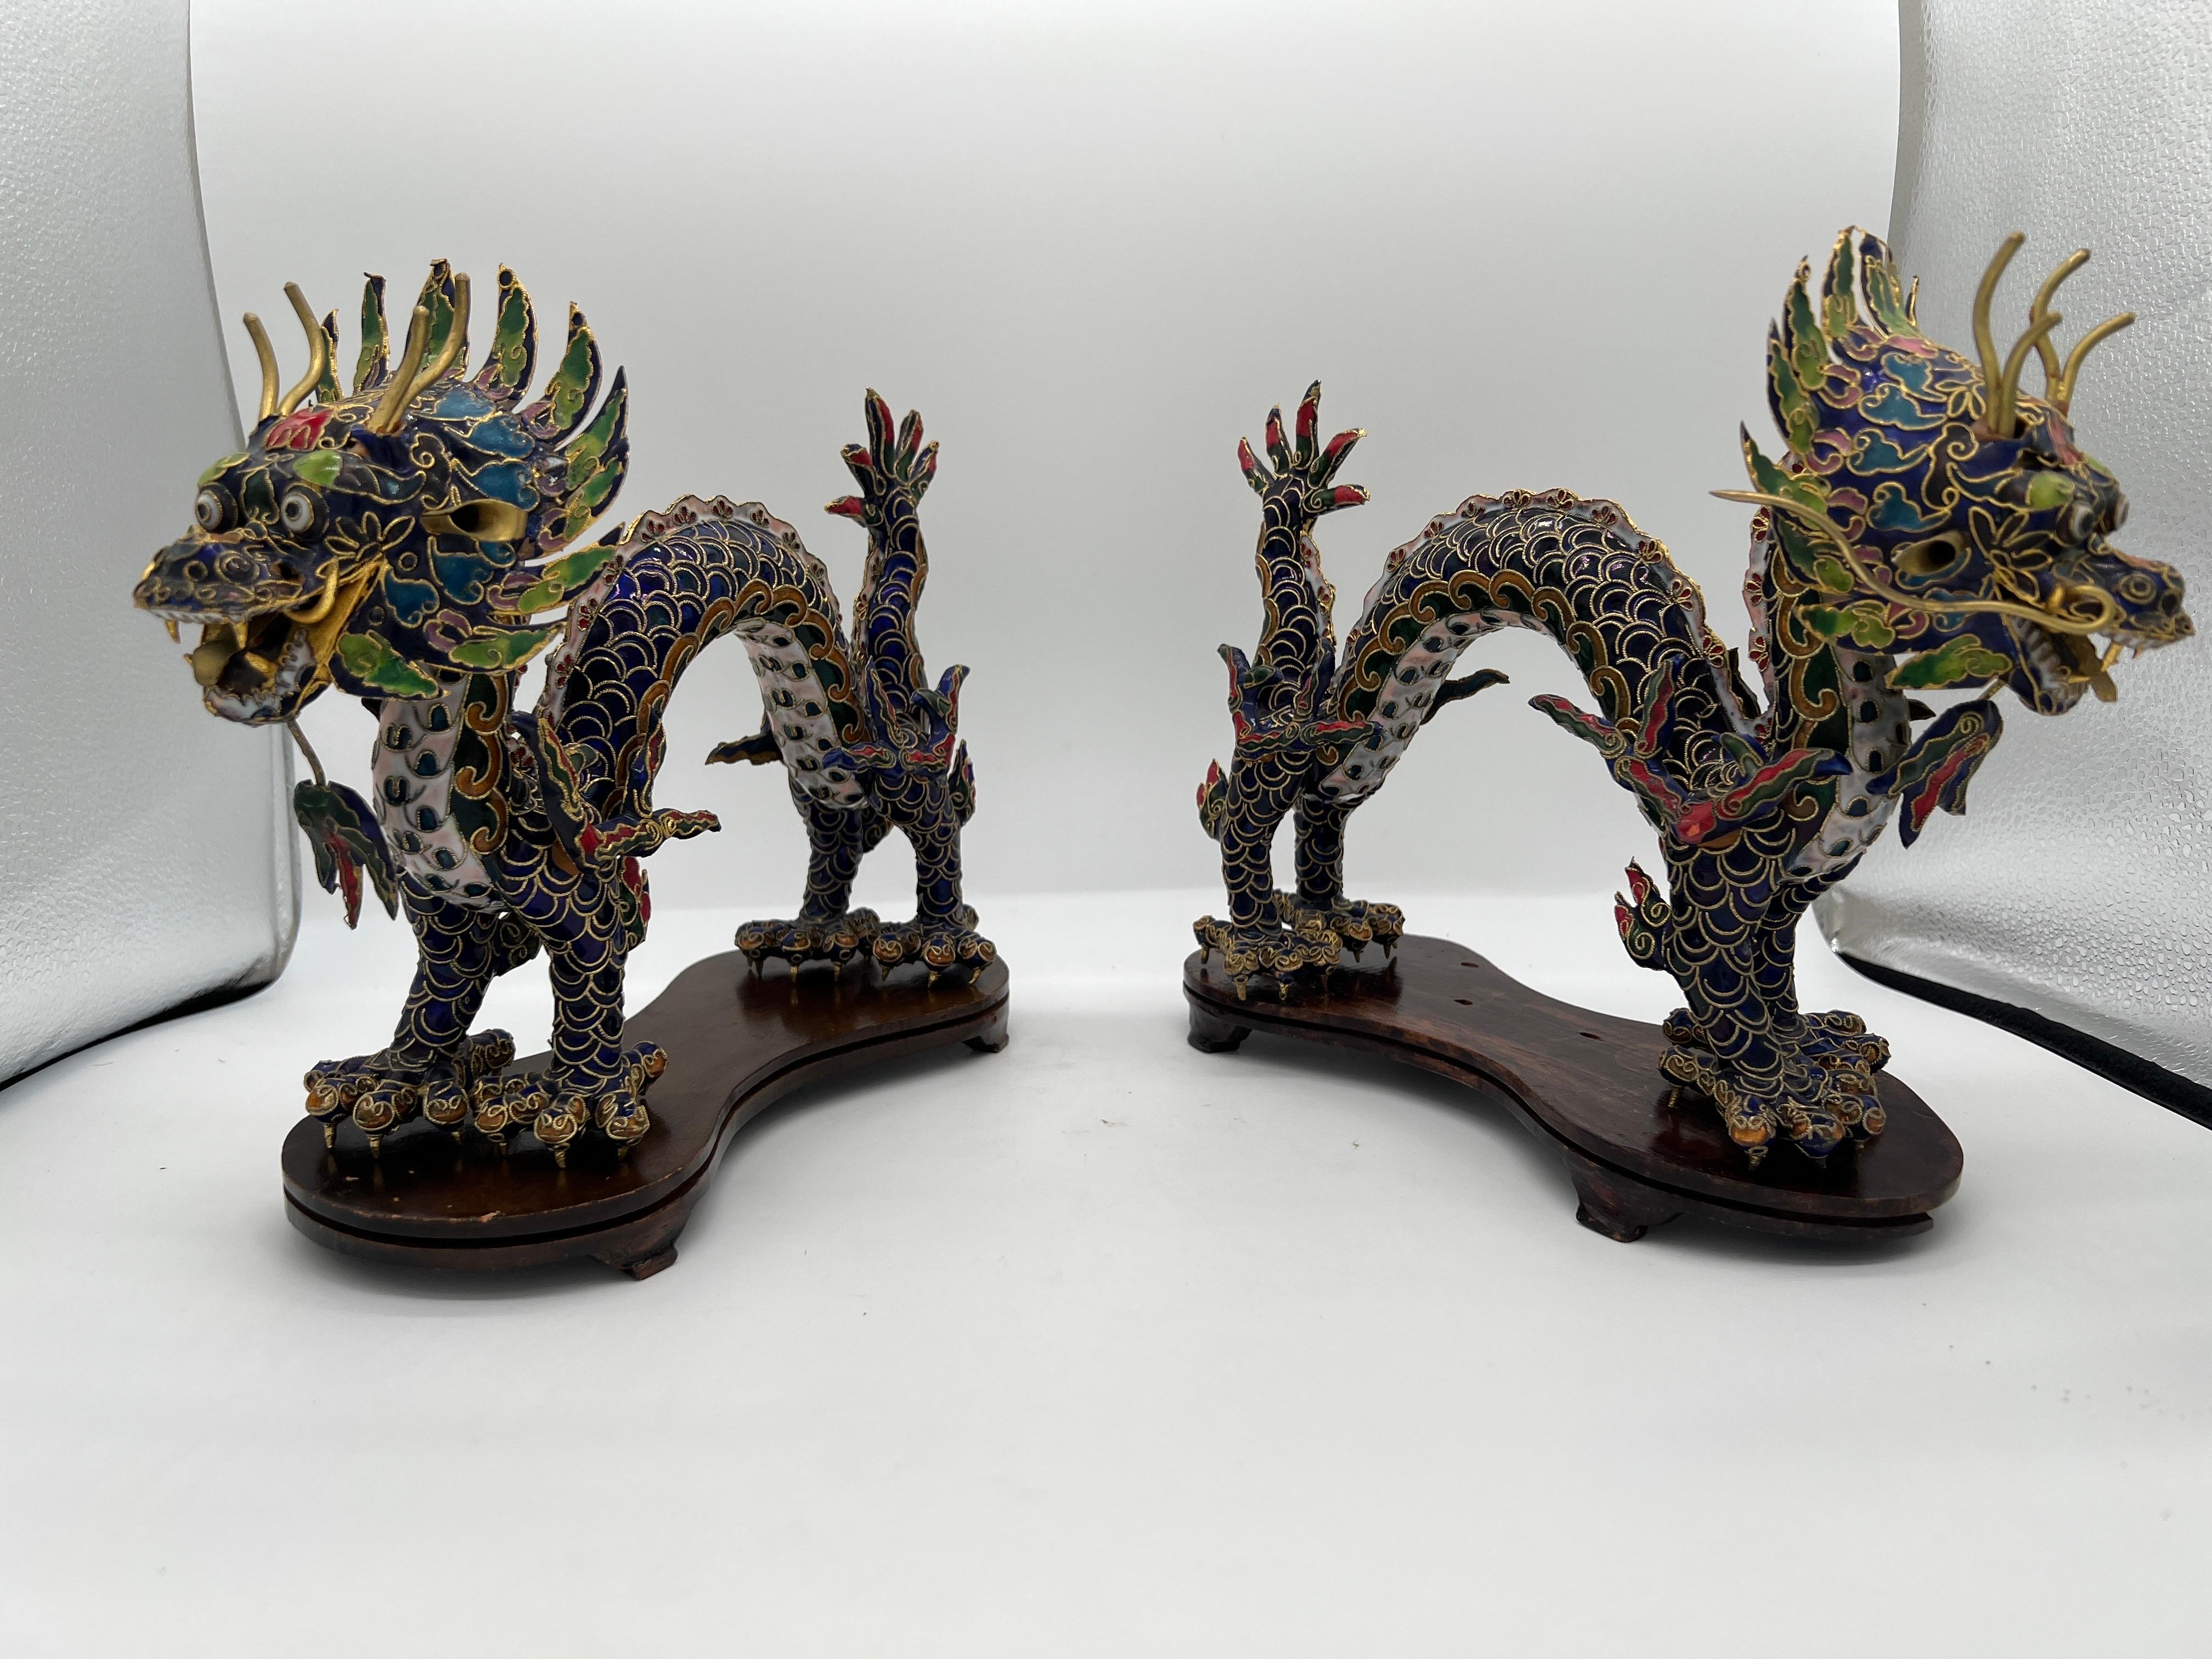 20th Century Pair, Chinese Export Cloisonne Enameled Dragon Figurines on Stands For Sale